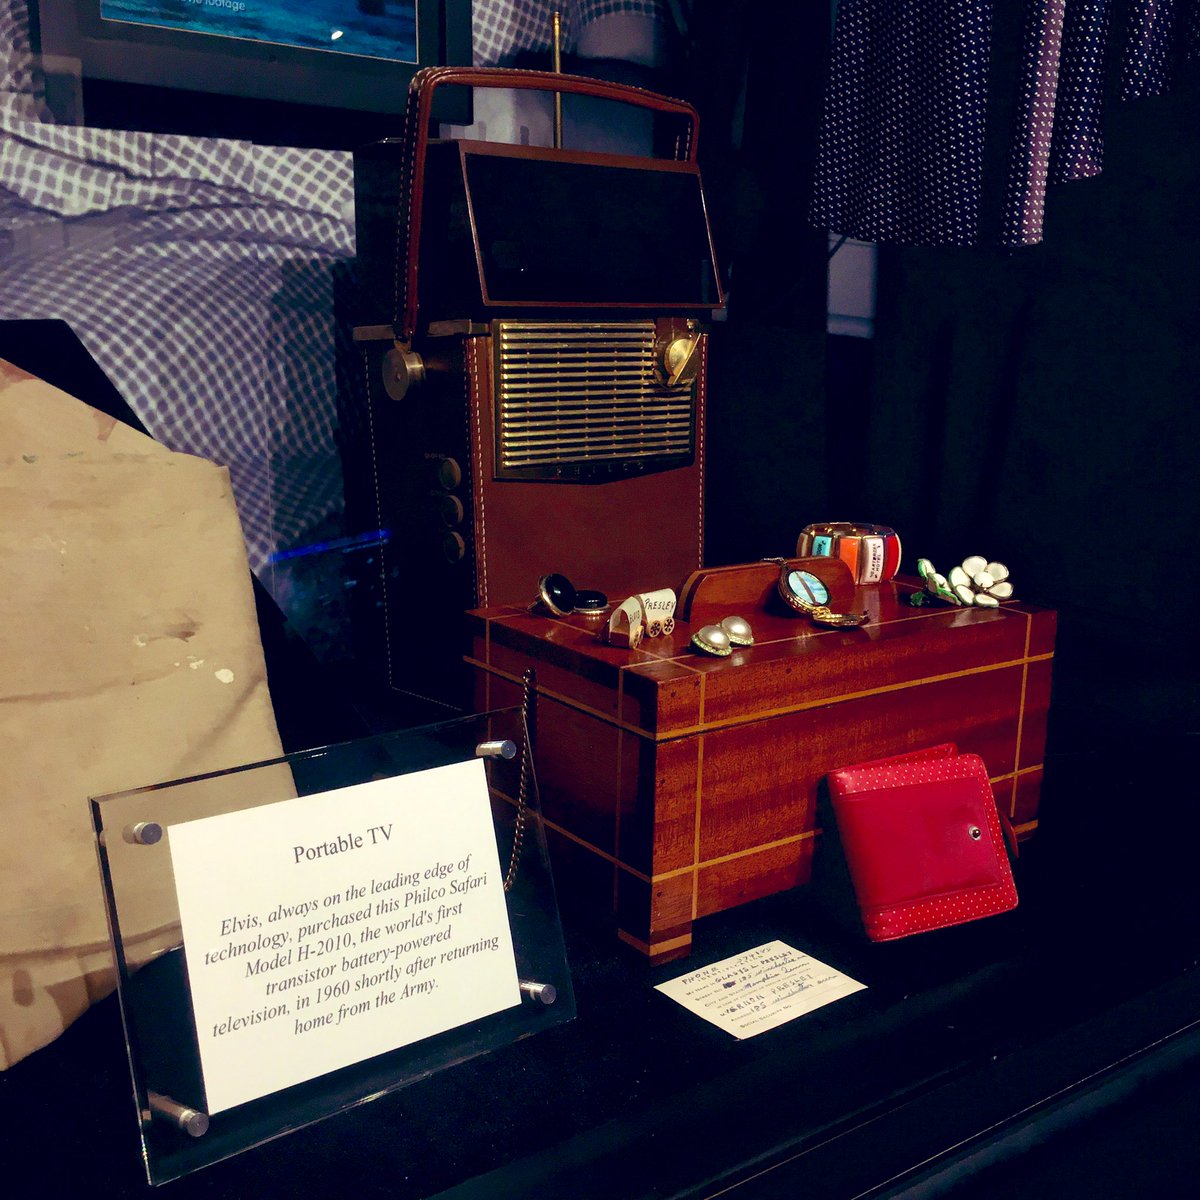 From Mississippi to Memphis, Tennessee: scenes from the “Trophy Room” exhibits on  #ElvisPresley at his home,  #Graceland, including his “portable TV” & the down payment check & deed to the now iconic mansion.